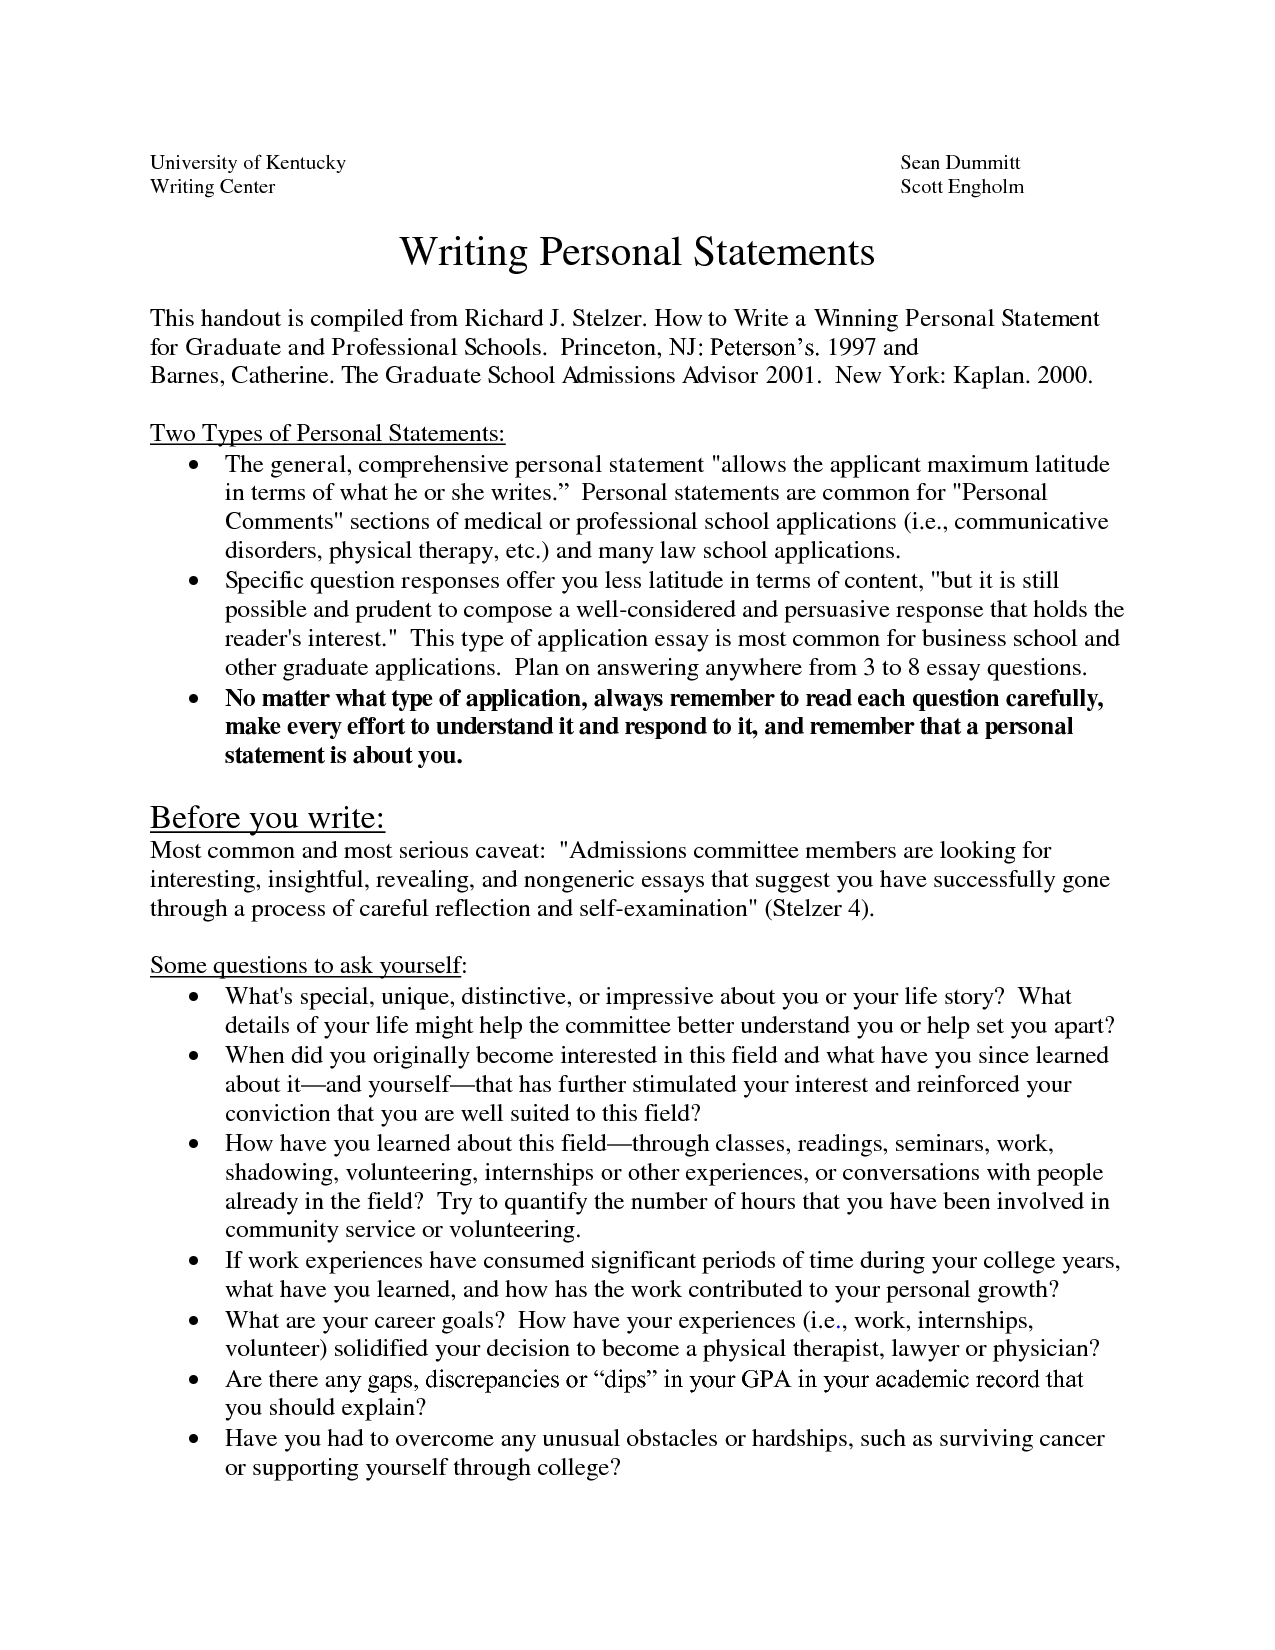 Personal statement for graduate school for social work